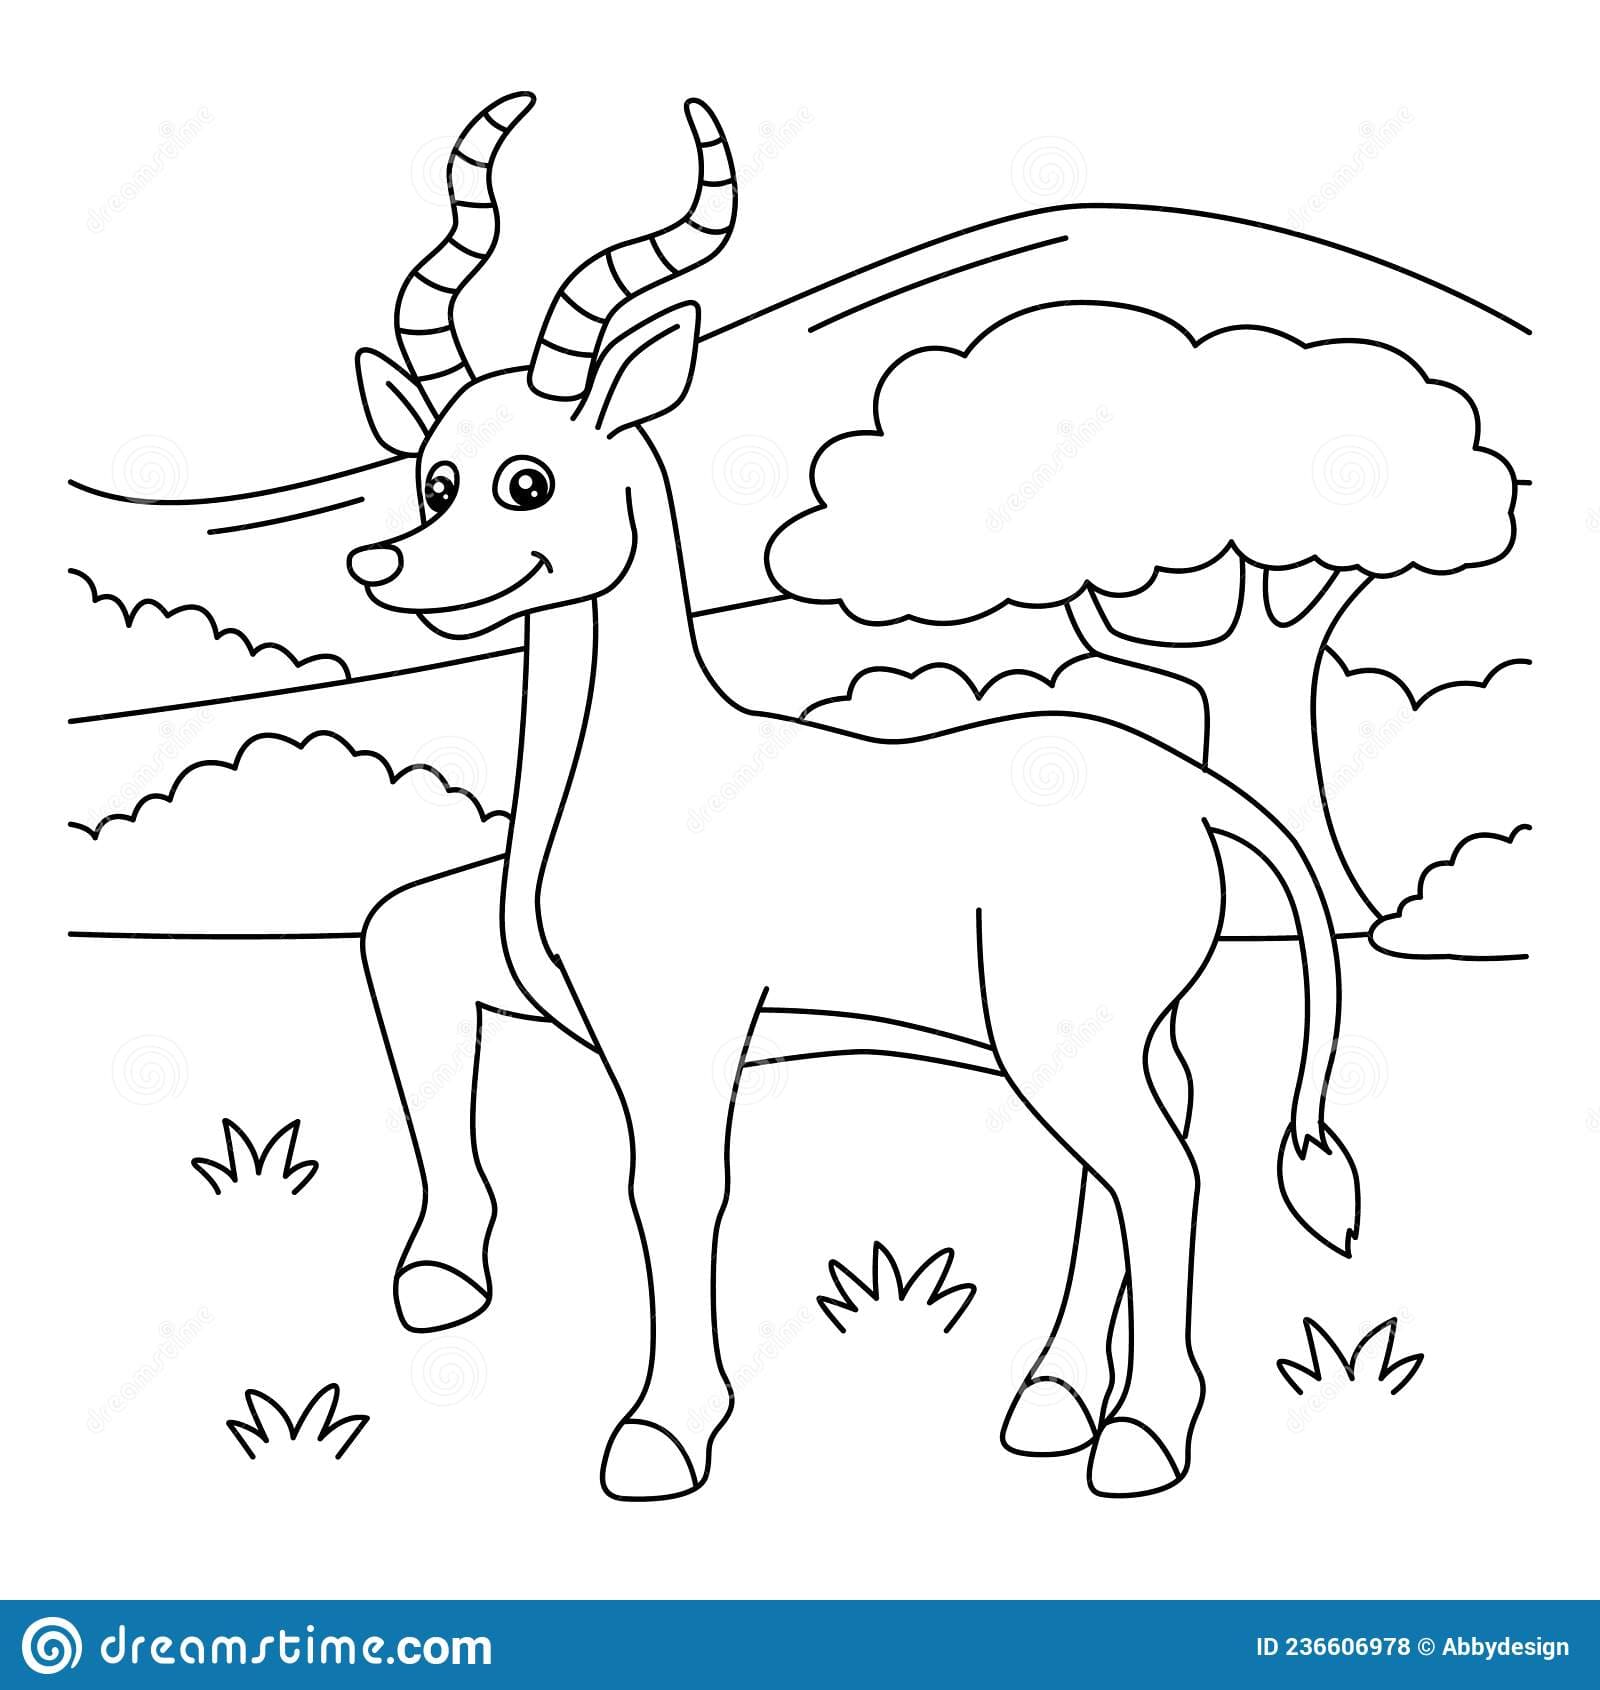 Antelope Coloring Page for Kids